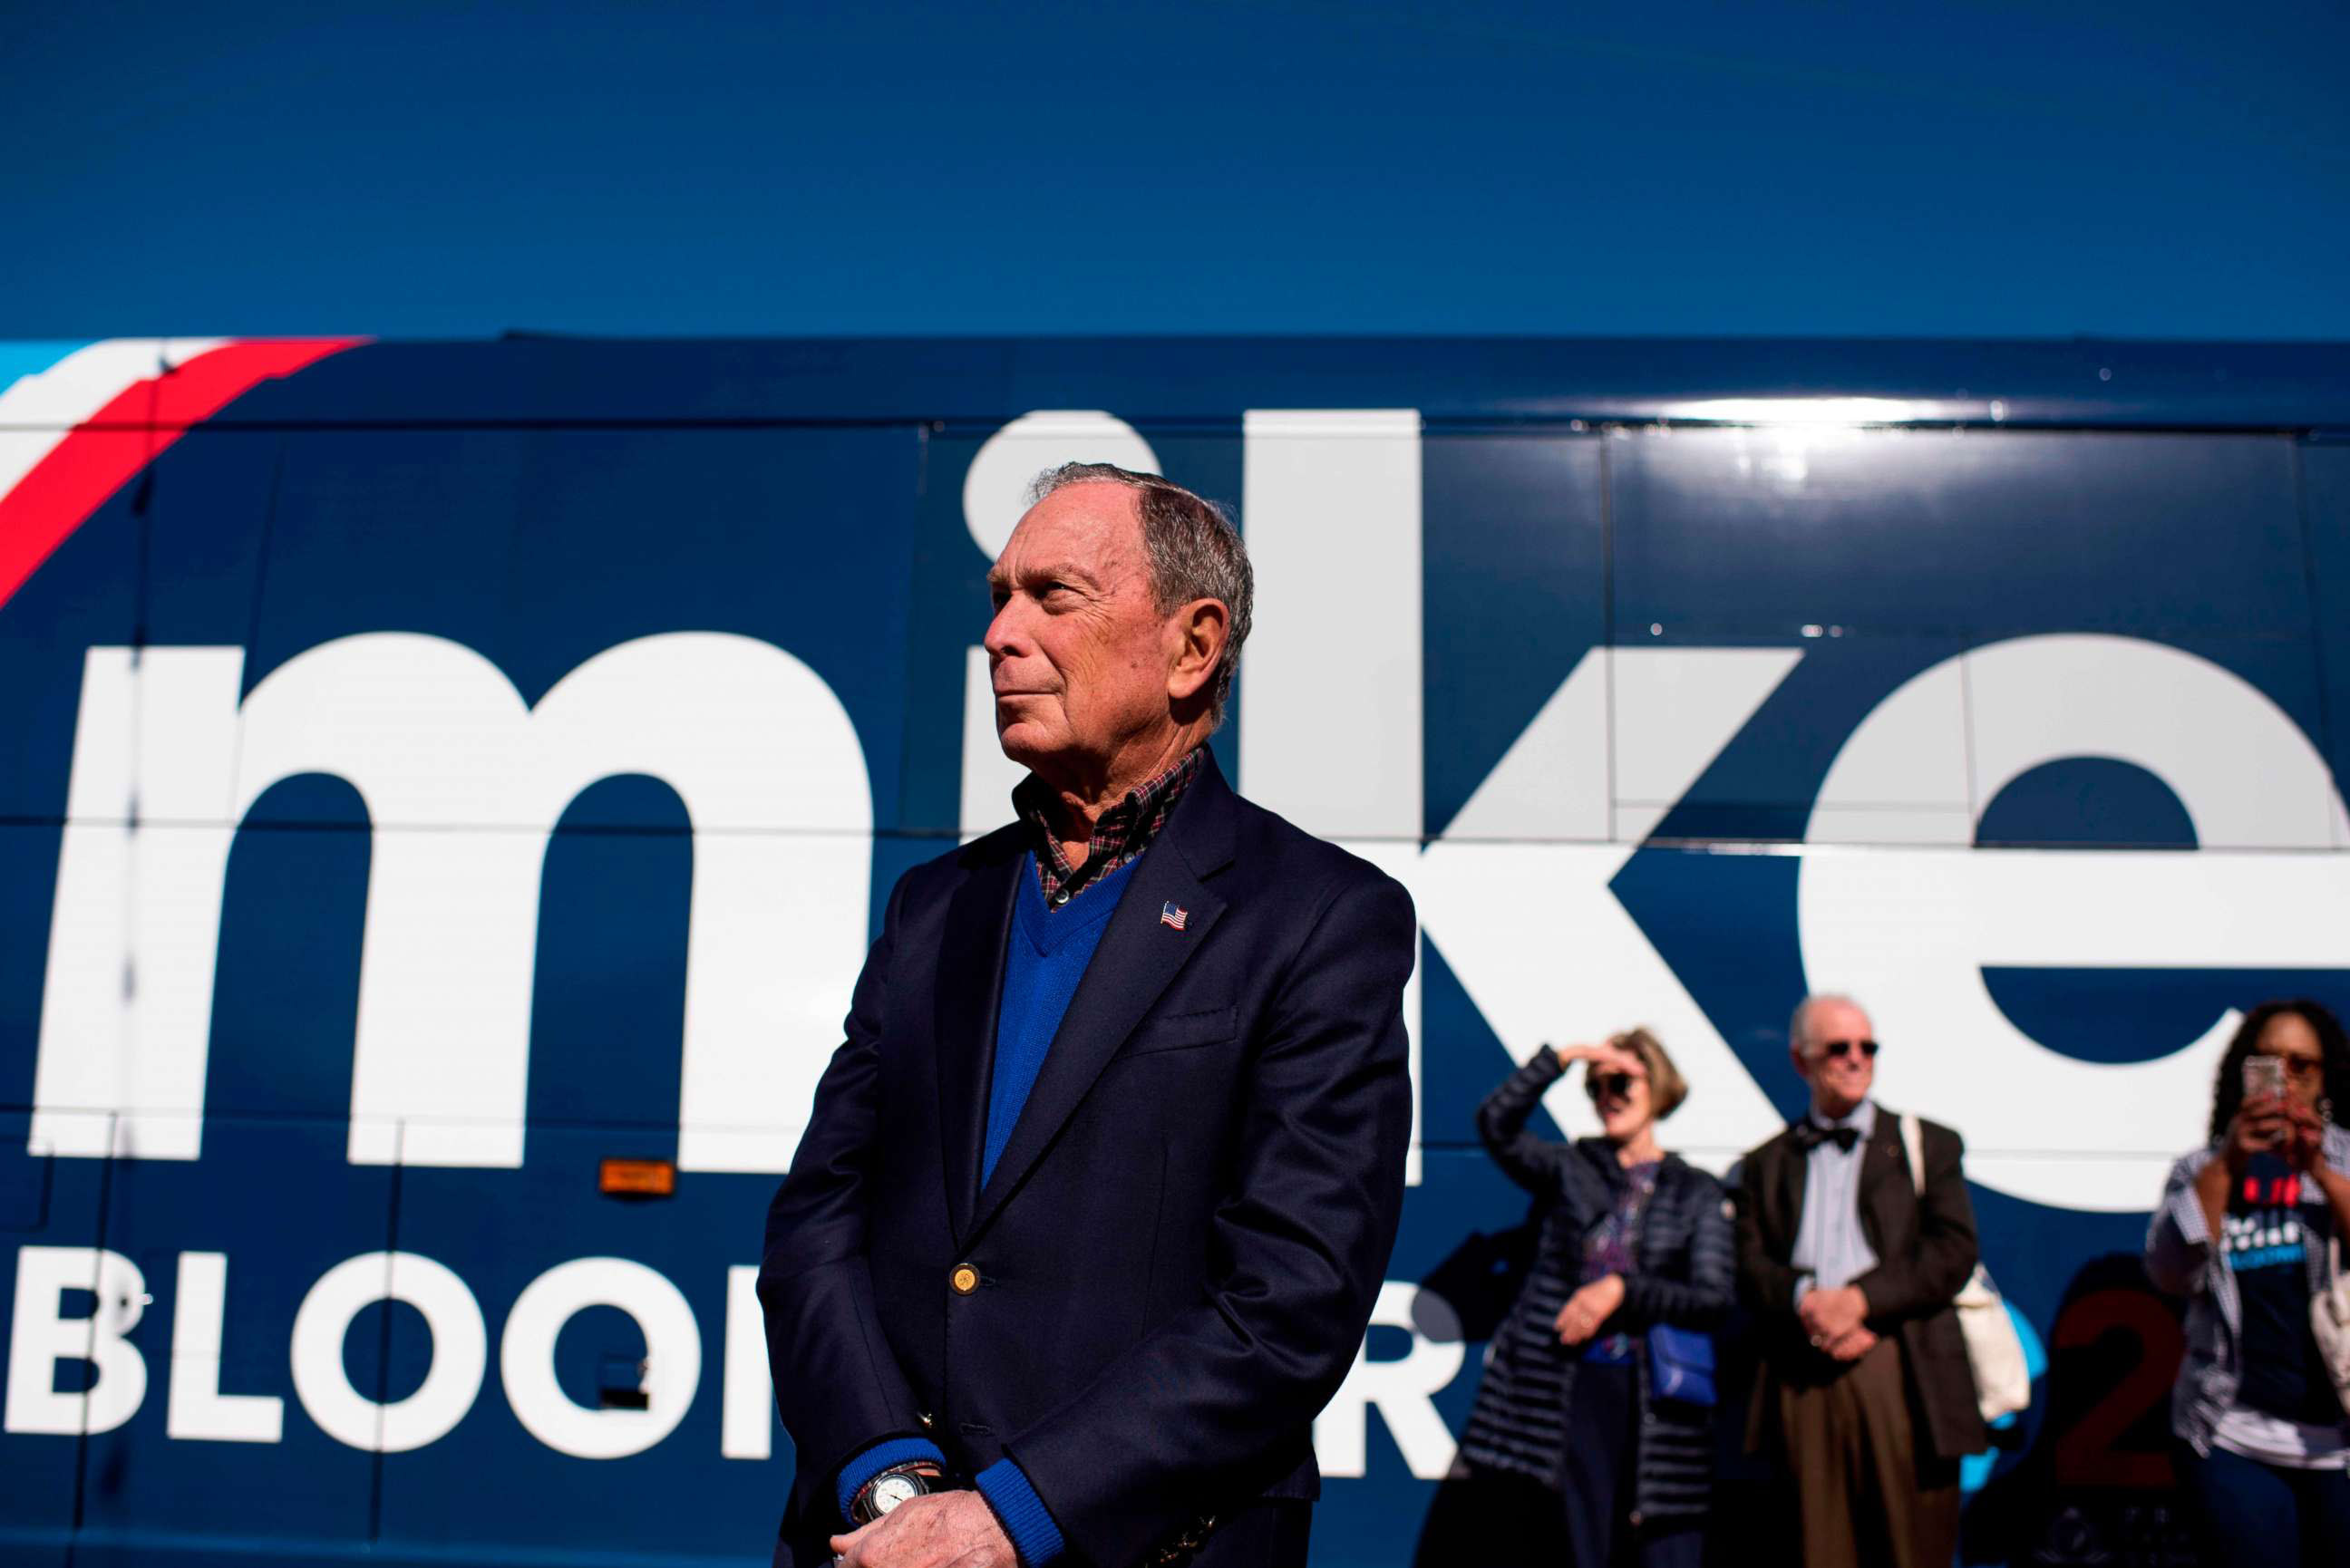 PHOTO: Democratic presidential candidate Mike Bloomberg waits by his tour bus ahead of addressing his supporters at Central Machine Works in Austin, Texas on Jan. 11, 2020.